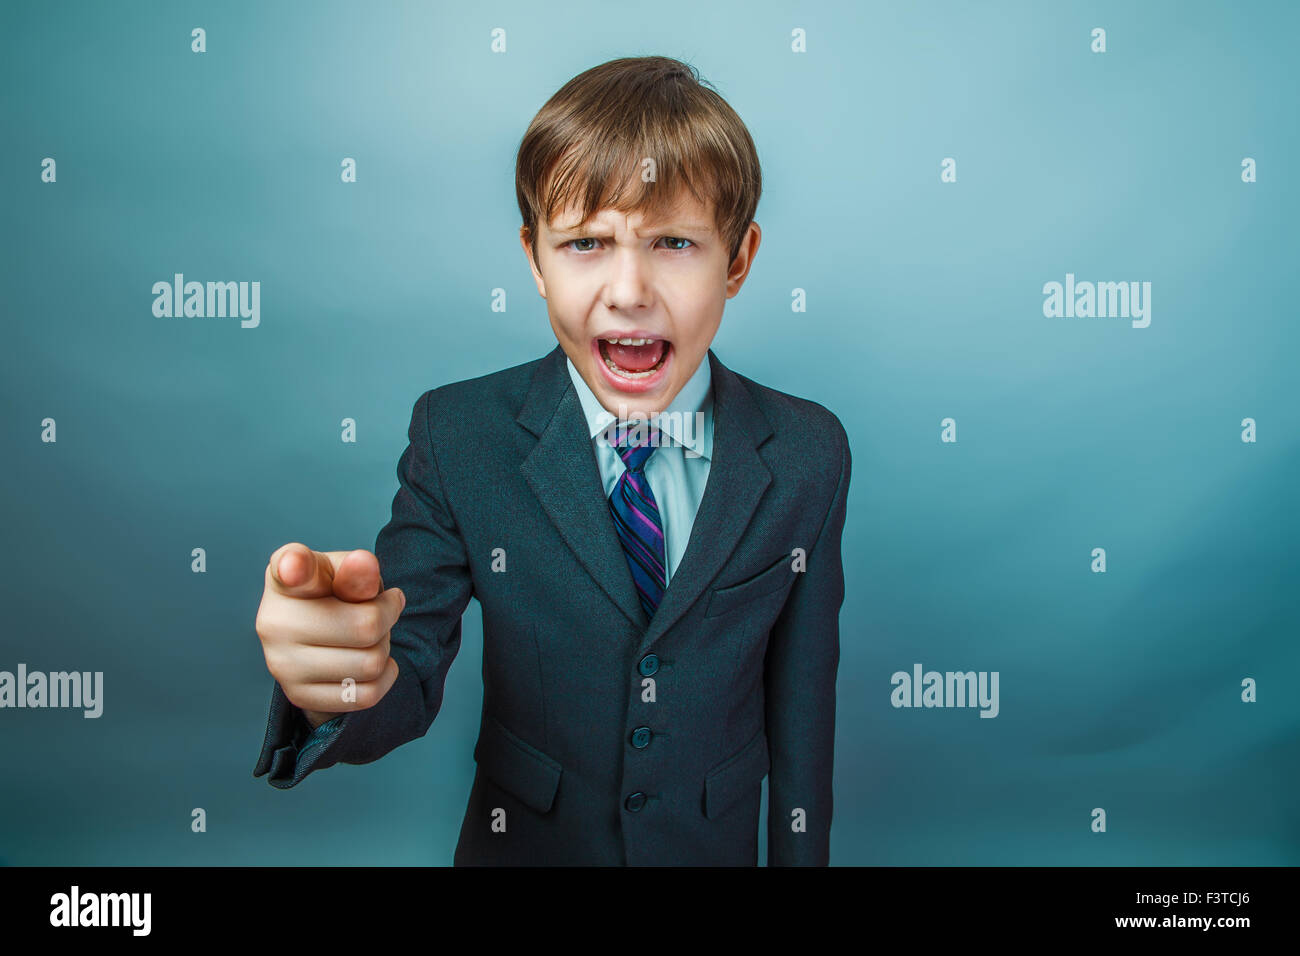 European appearance teenager boy in a business suit points a fin Stock Photo